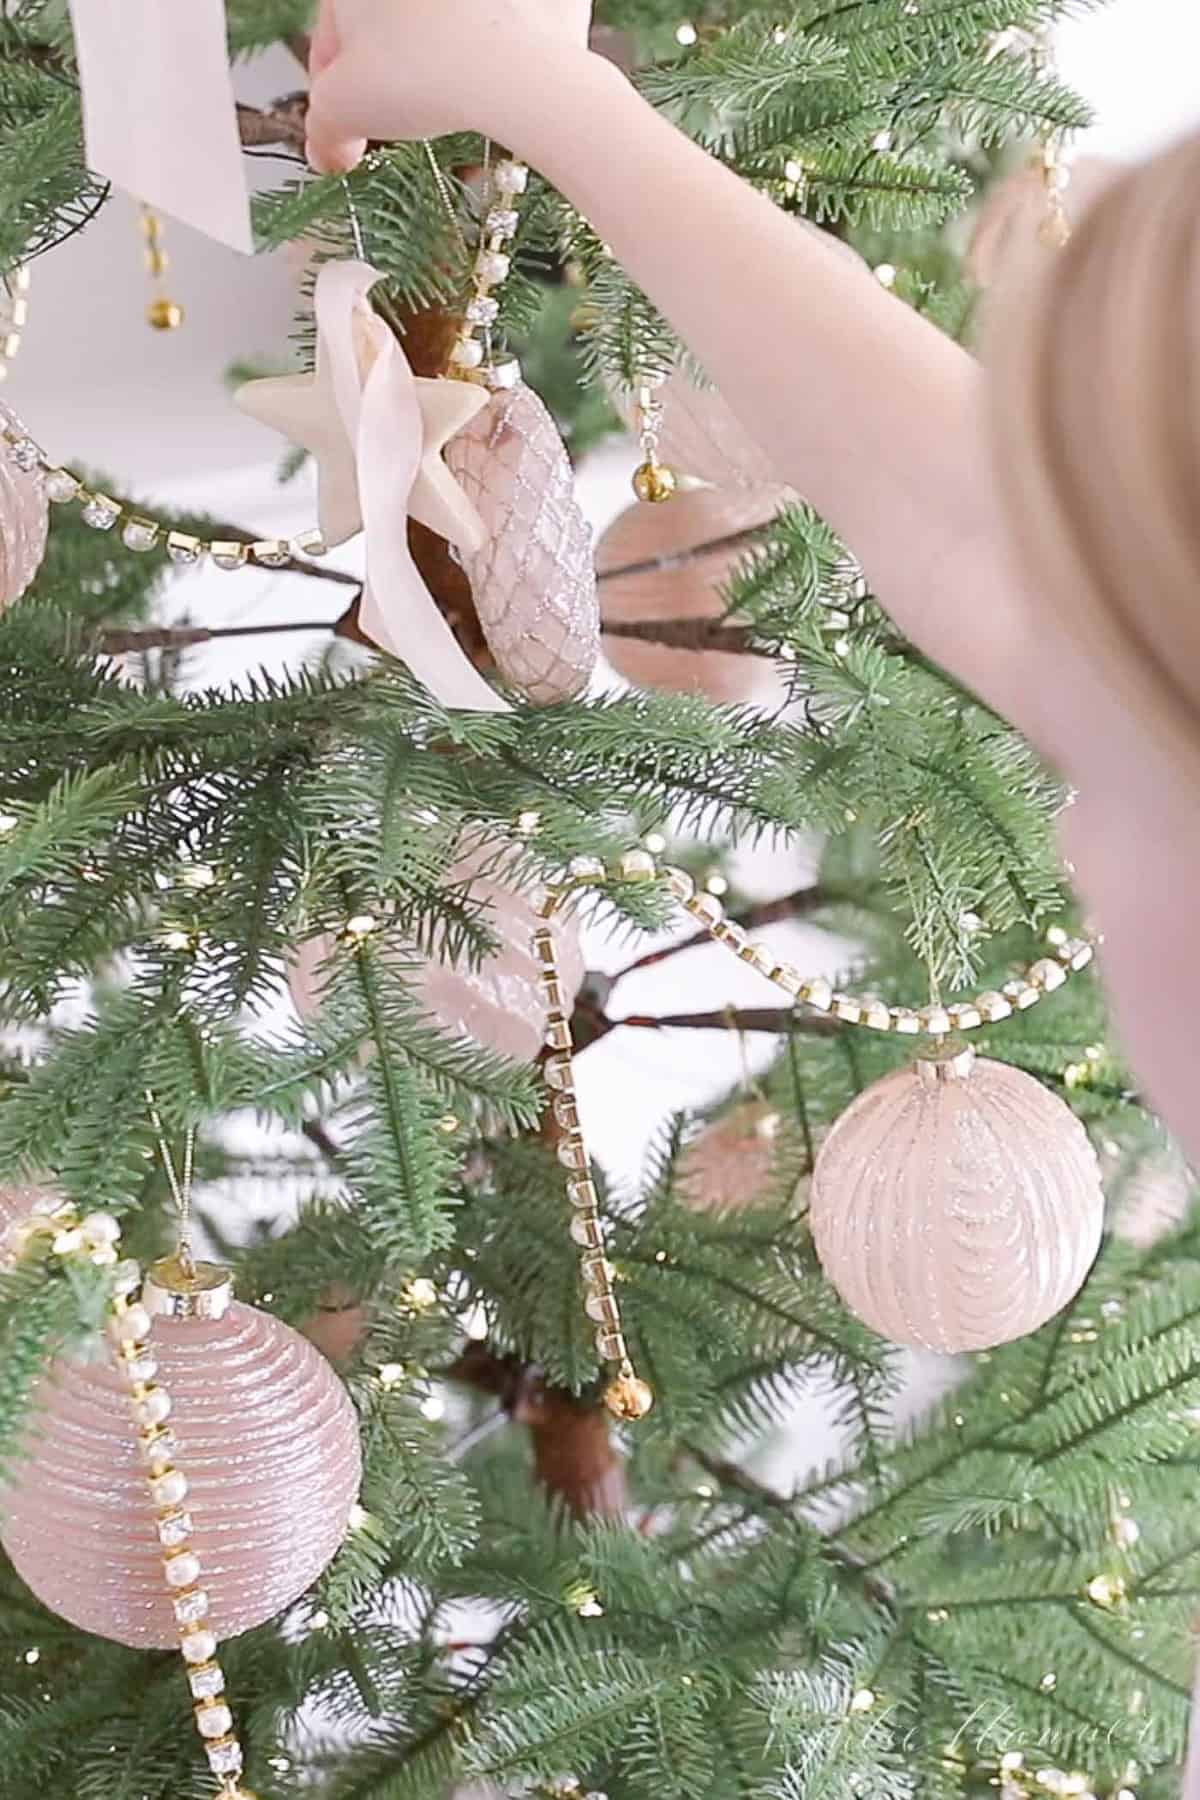 Salt dough ornaments shaped into a star hanging from a Christmas Tree. 